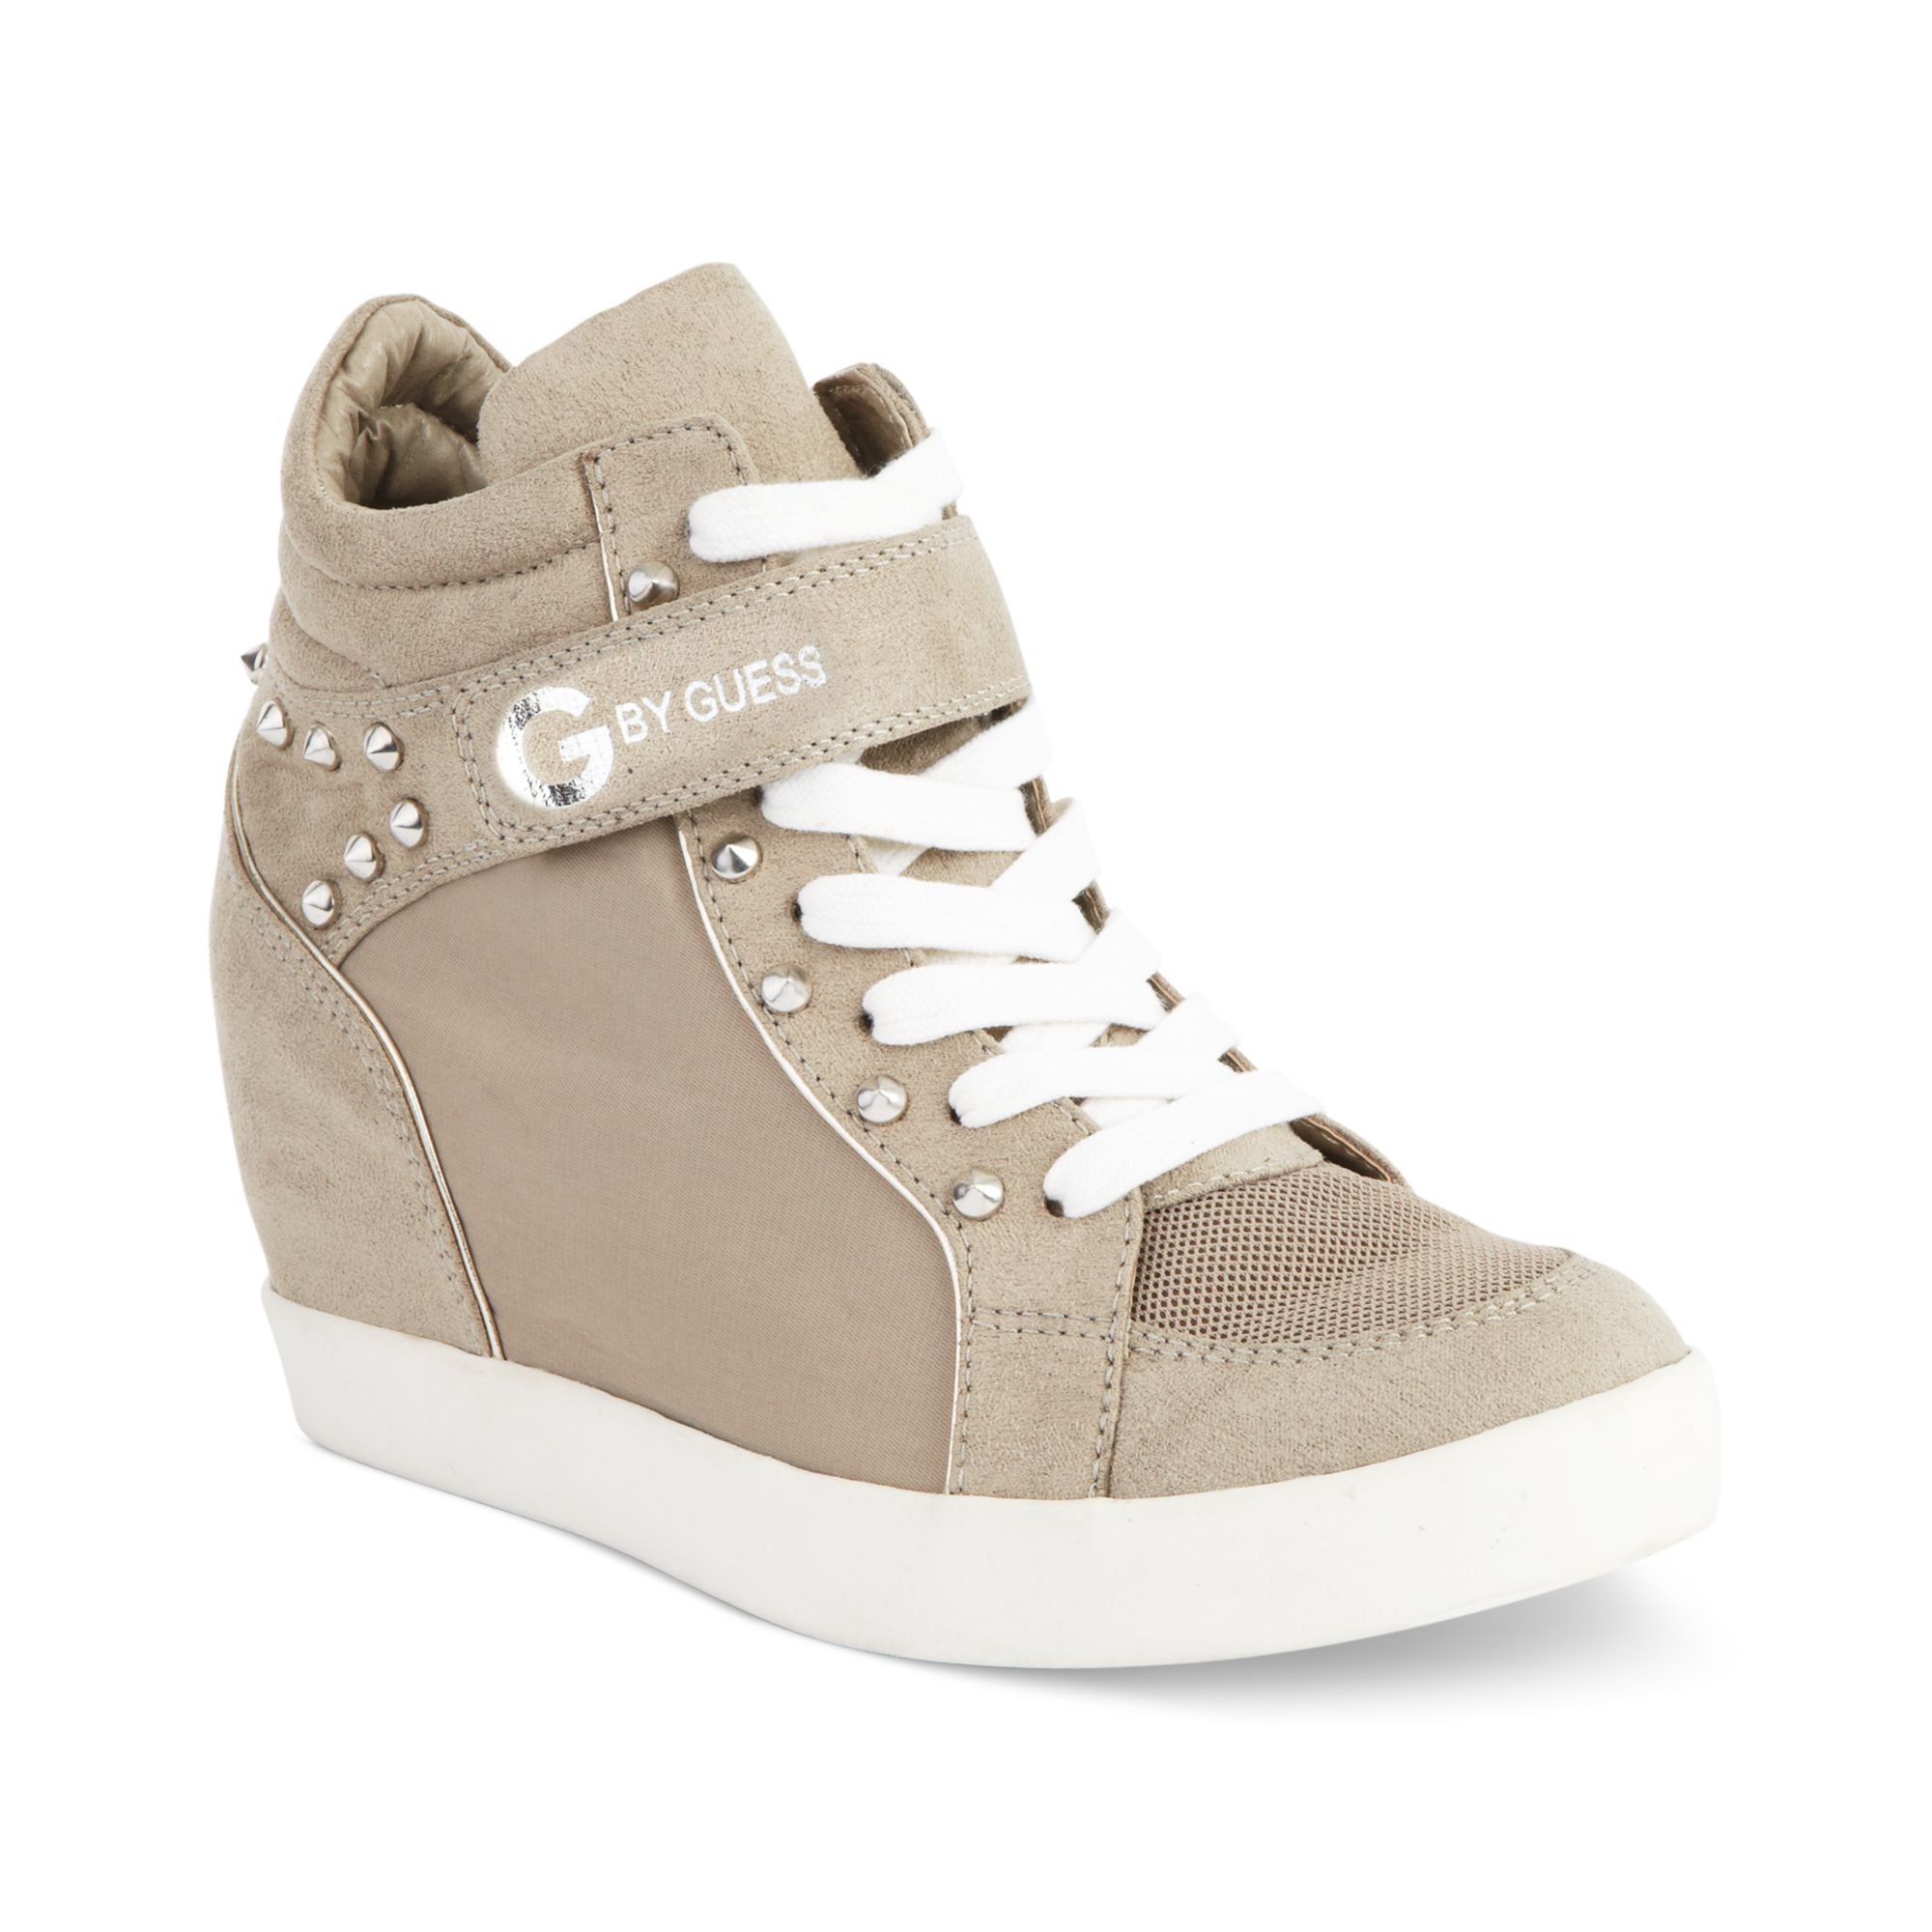 Lyst - G By Guess Womens Shoes Pop Star Wedge Sneakers in Natural